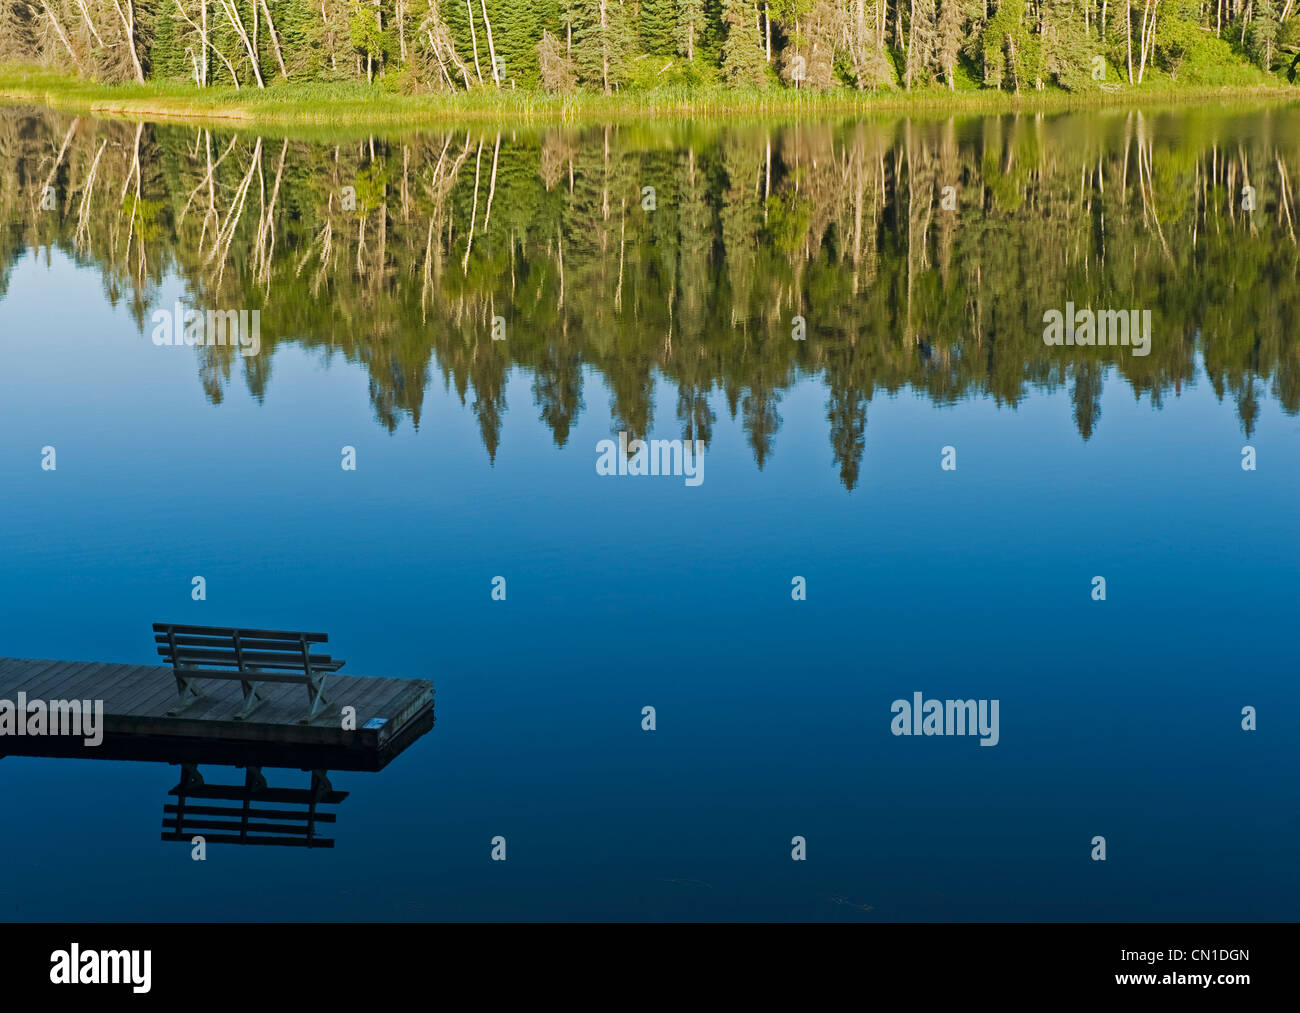 Bench on a dock and trees reflected in water, Two Mile Lake, Duck Mountain Provincial Park, Manitoba Stock Photo